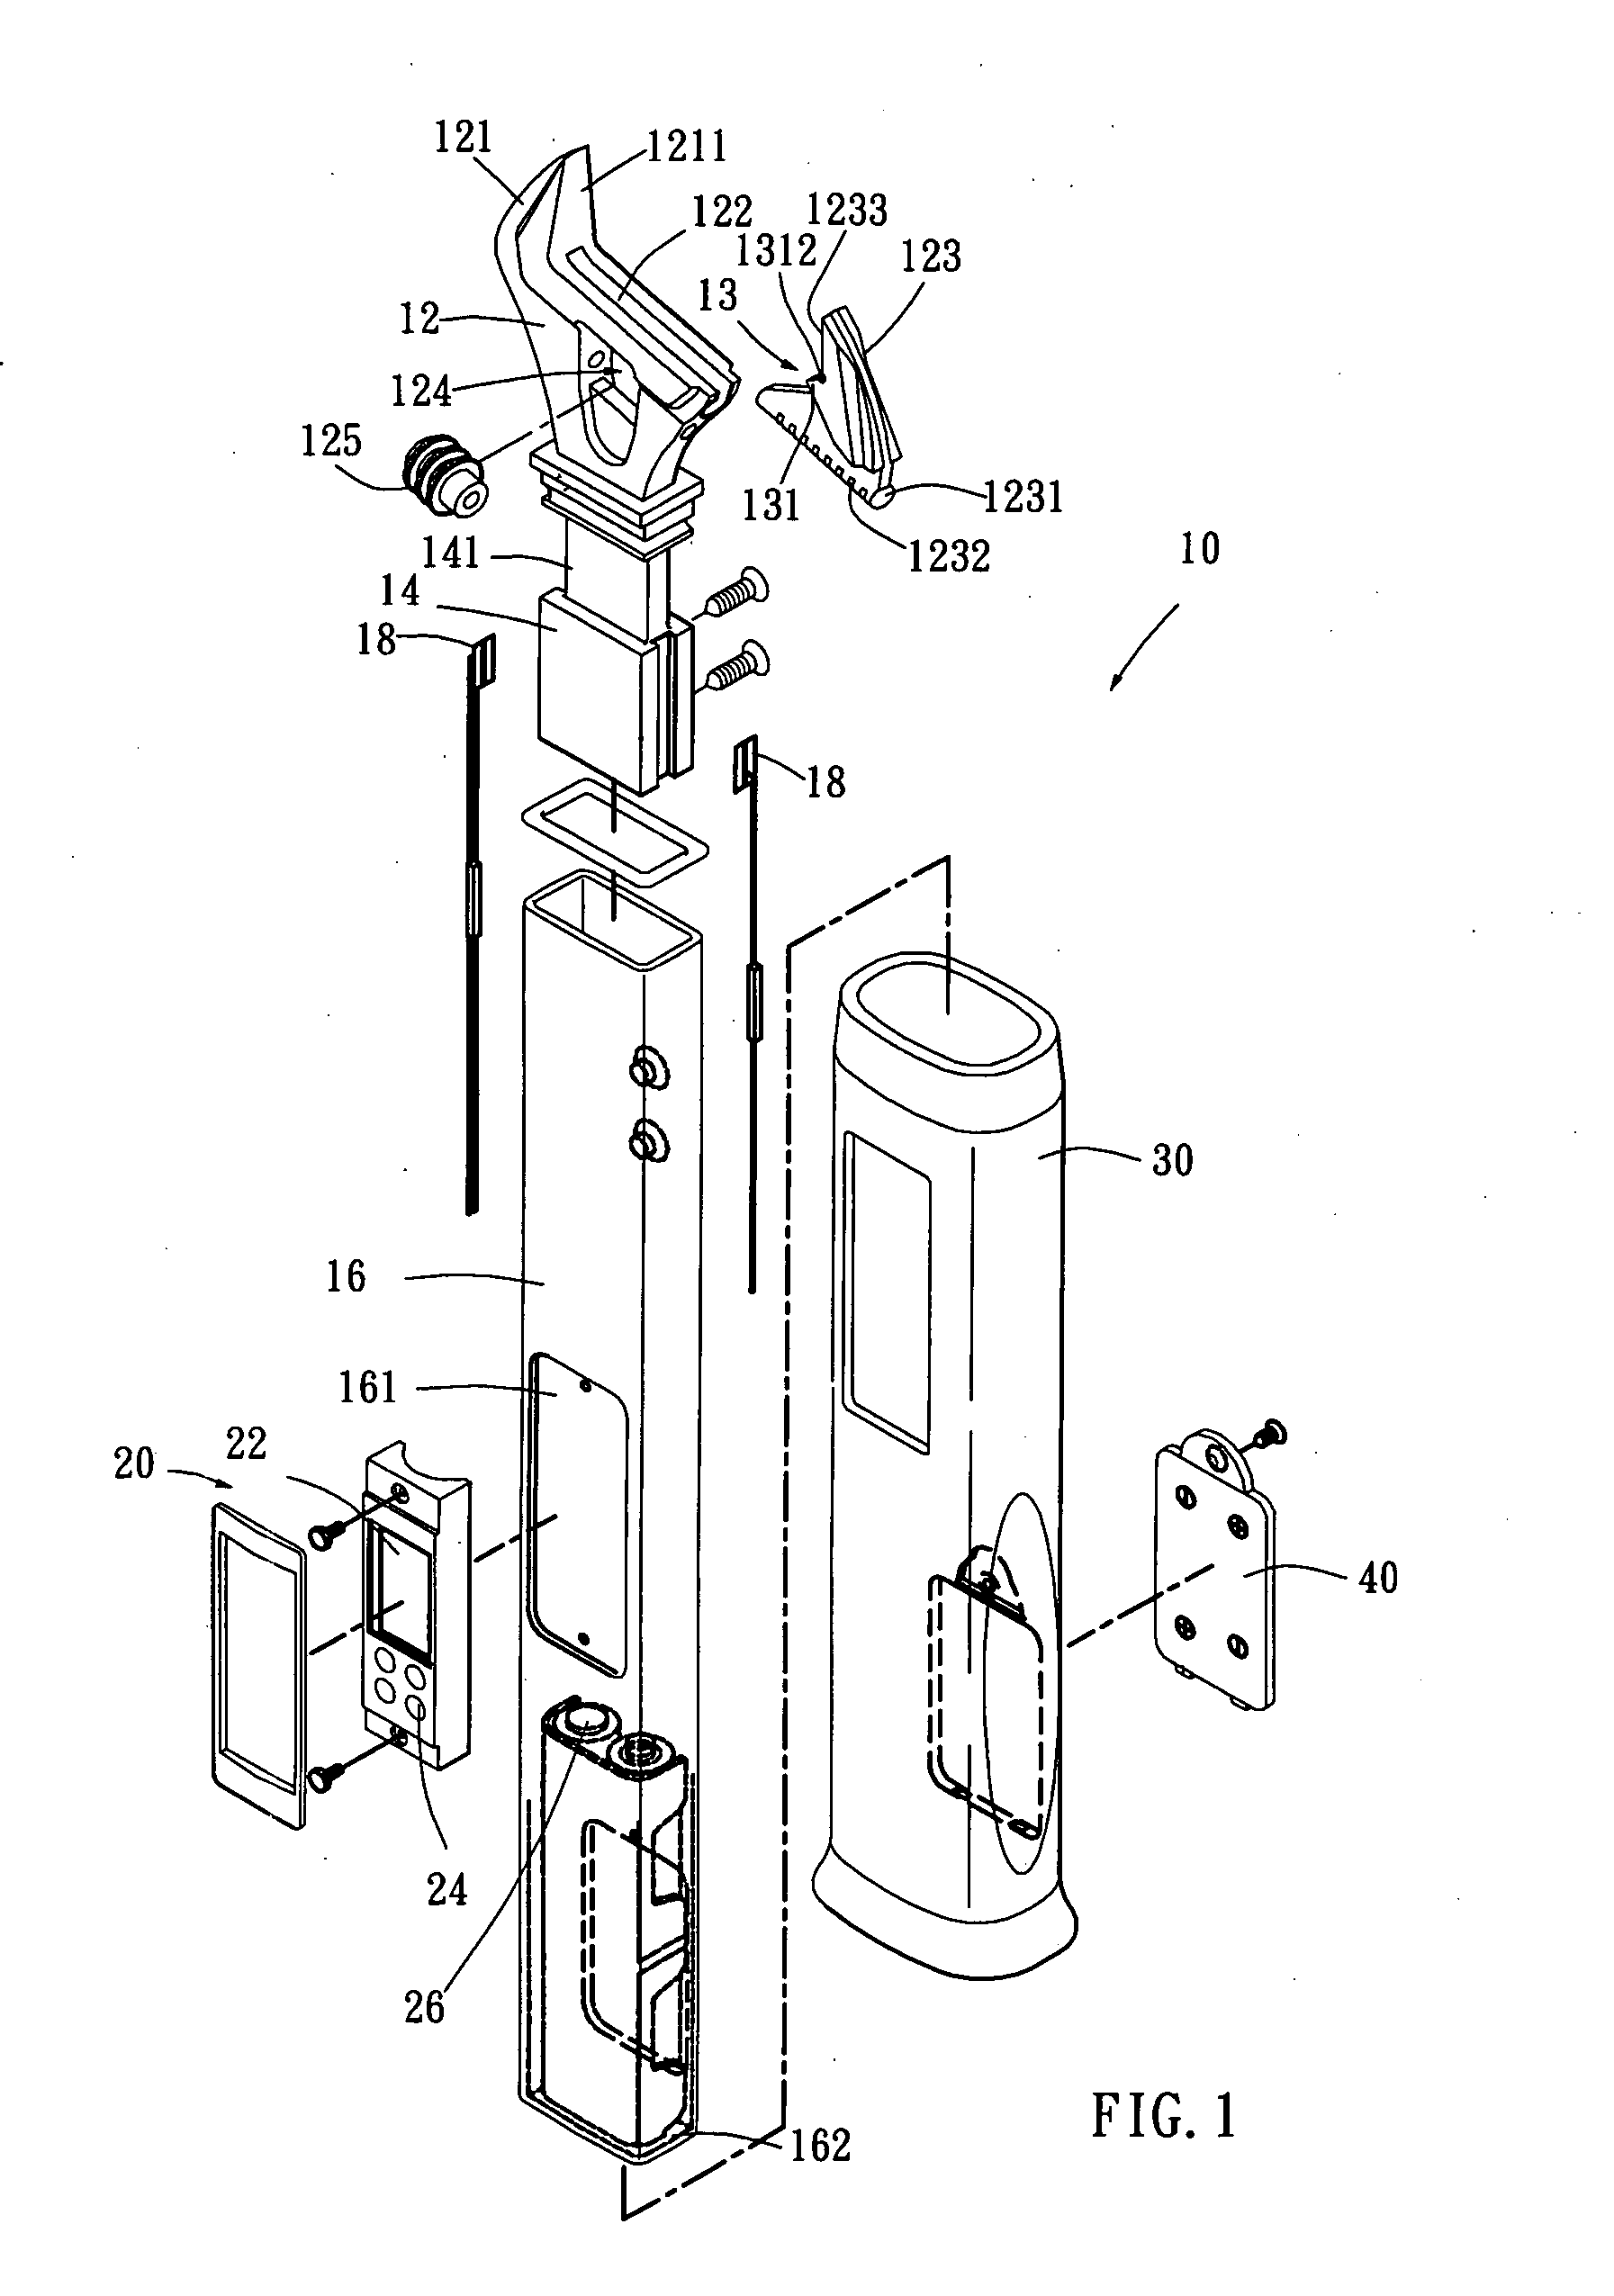 Adjustable spanner with electronic strain gauge function